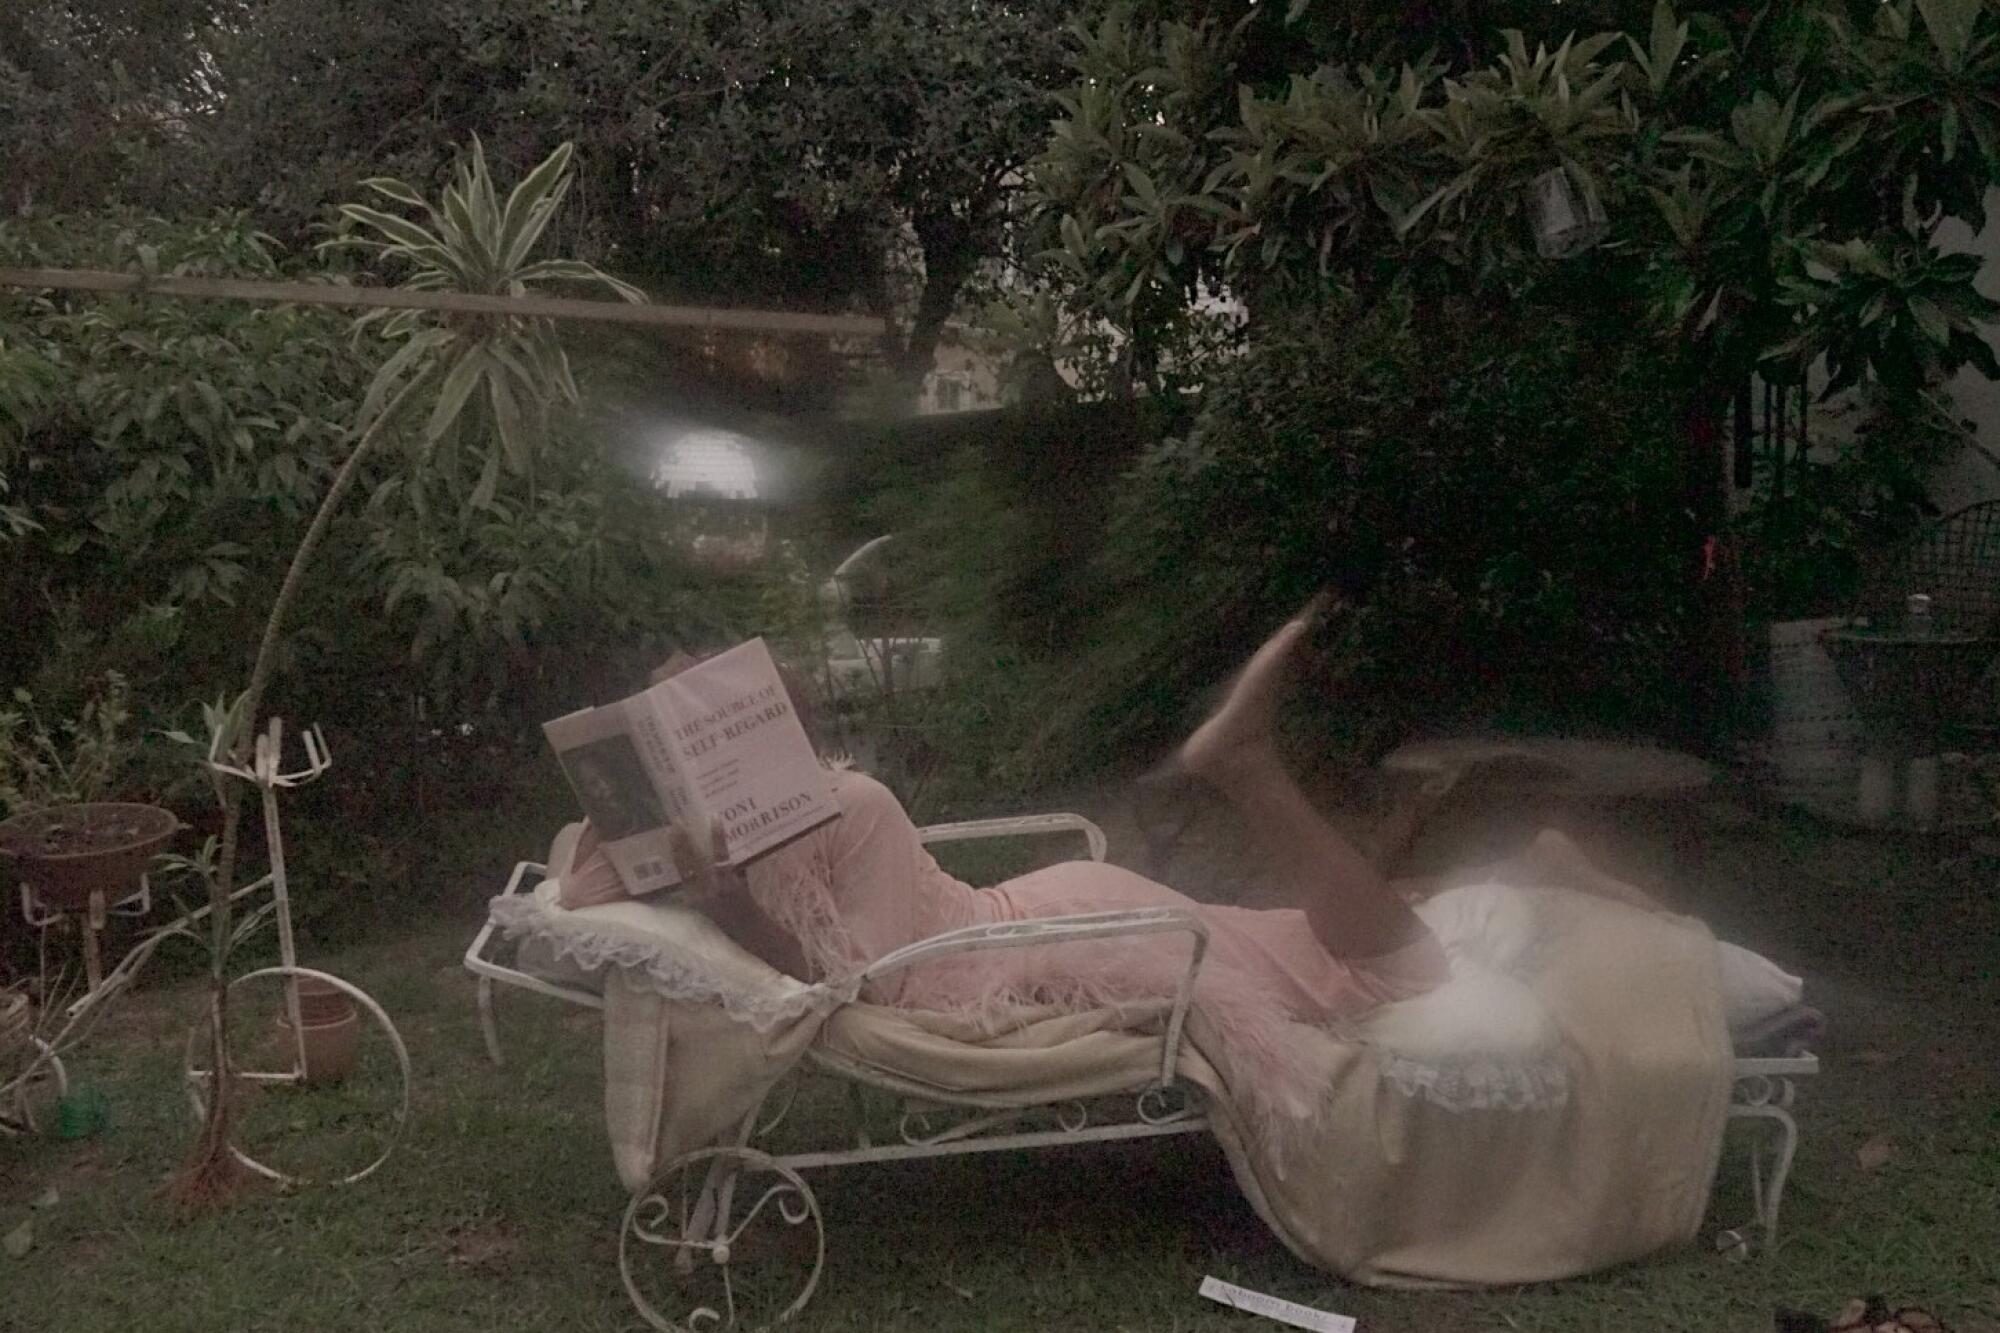 A woman leans on a chaise longue outside, reading Toni Morrison's “The Source of Self-Regard."